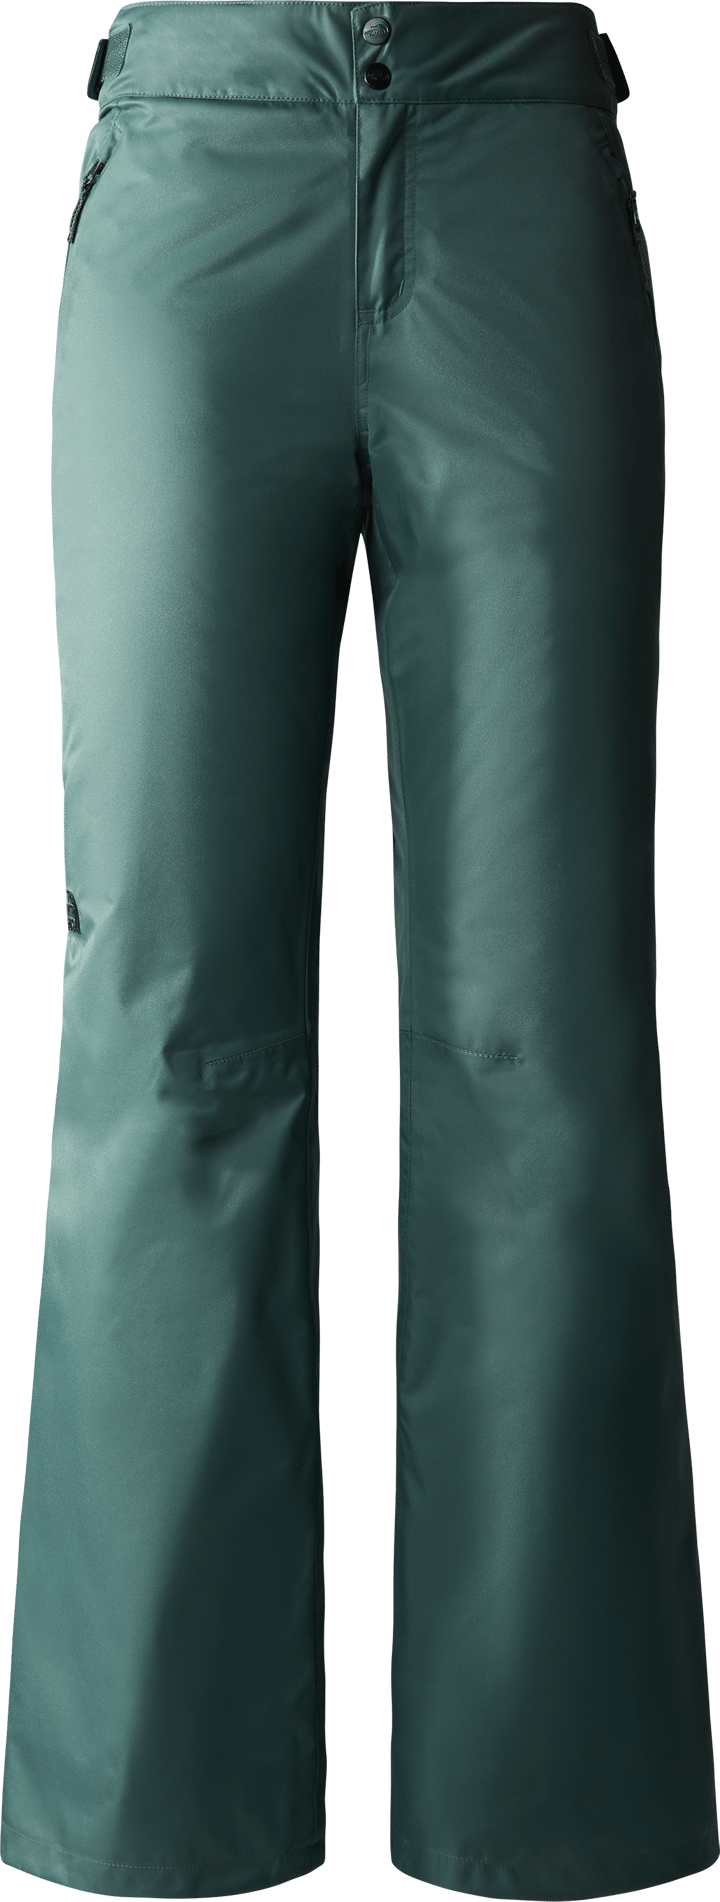 Women's Sally Insulated Pant DARK SAGE The North Face